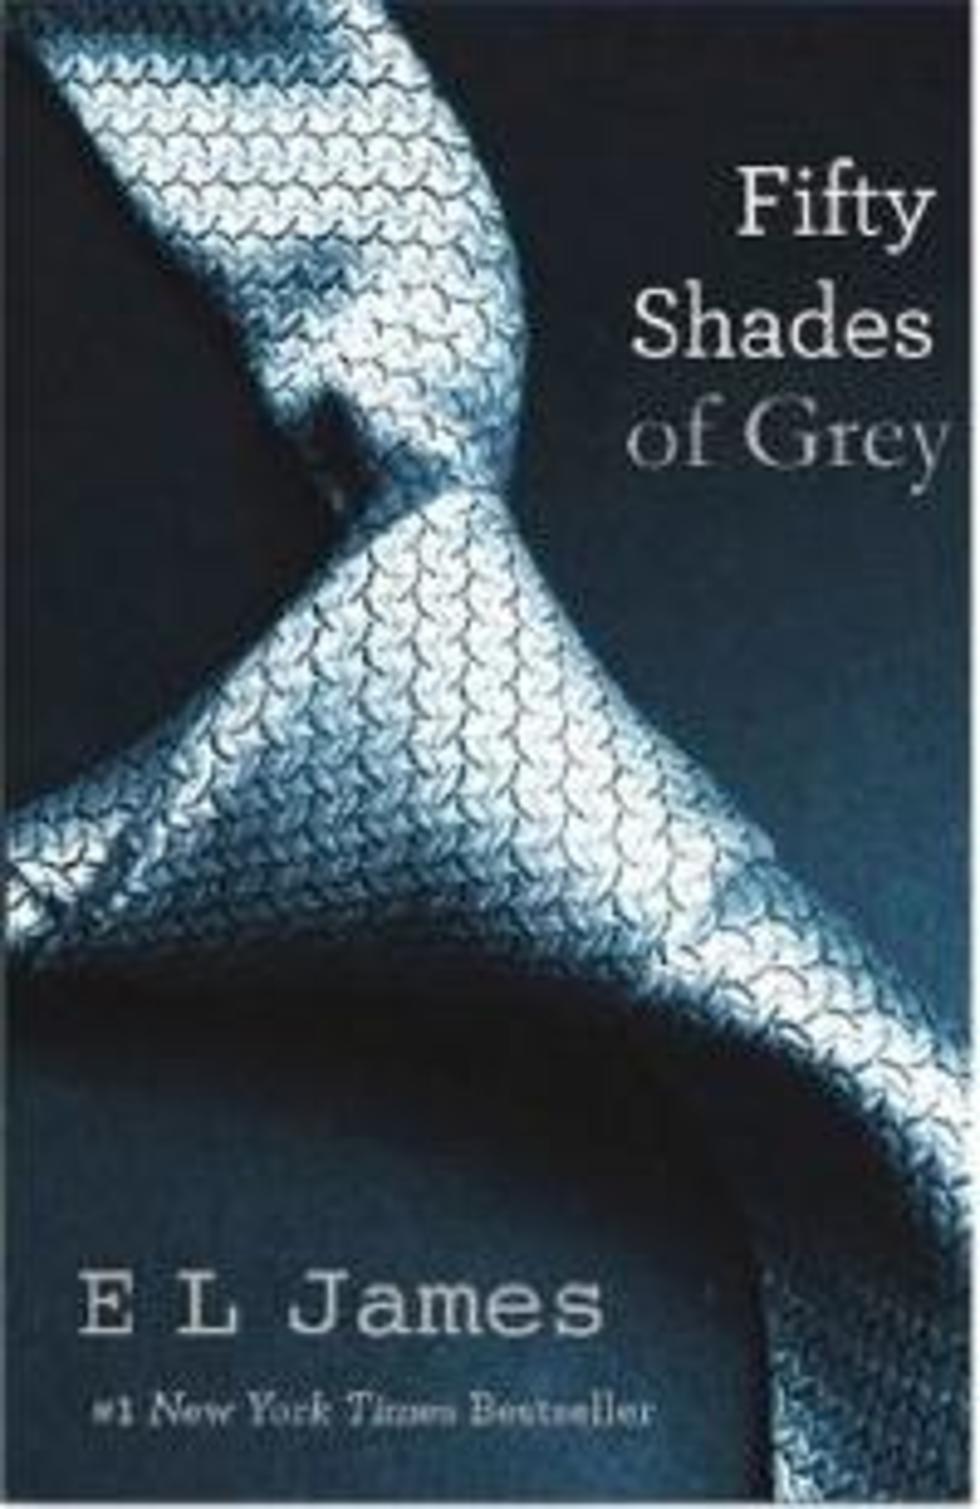 Has Fifty Shades of Grey Changed Things in Your Bedroom